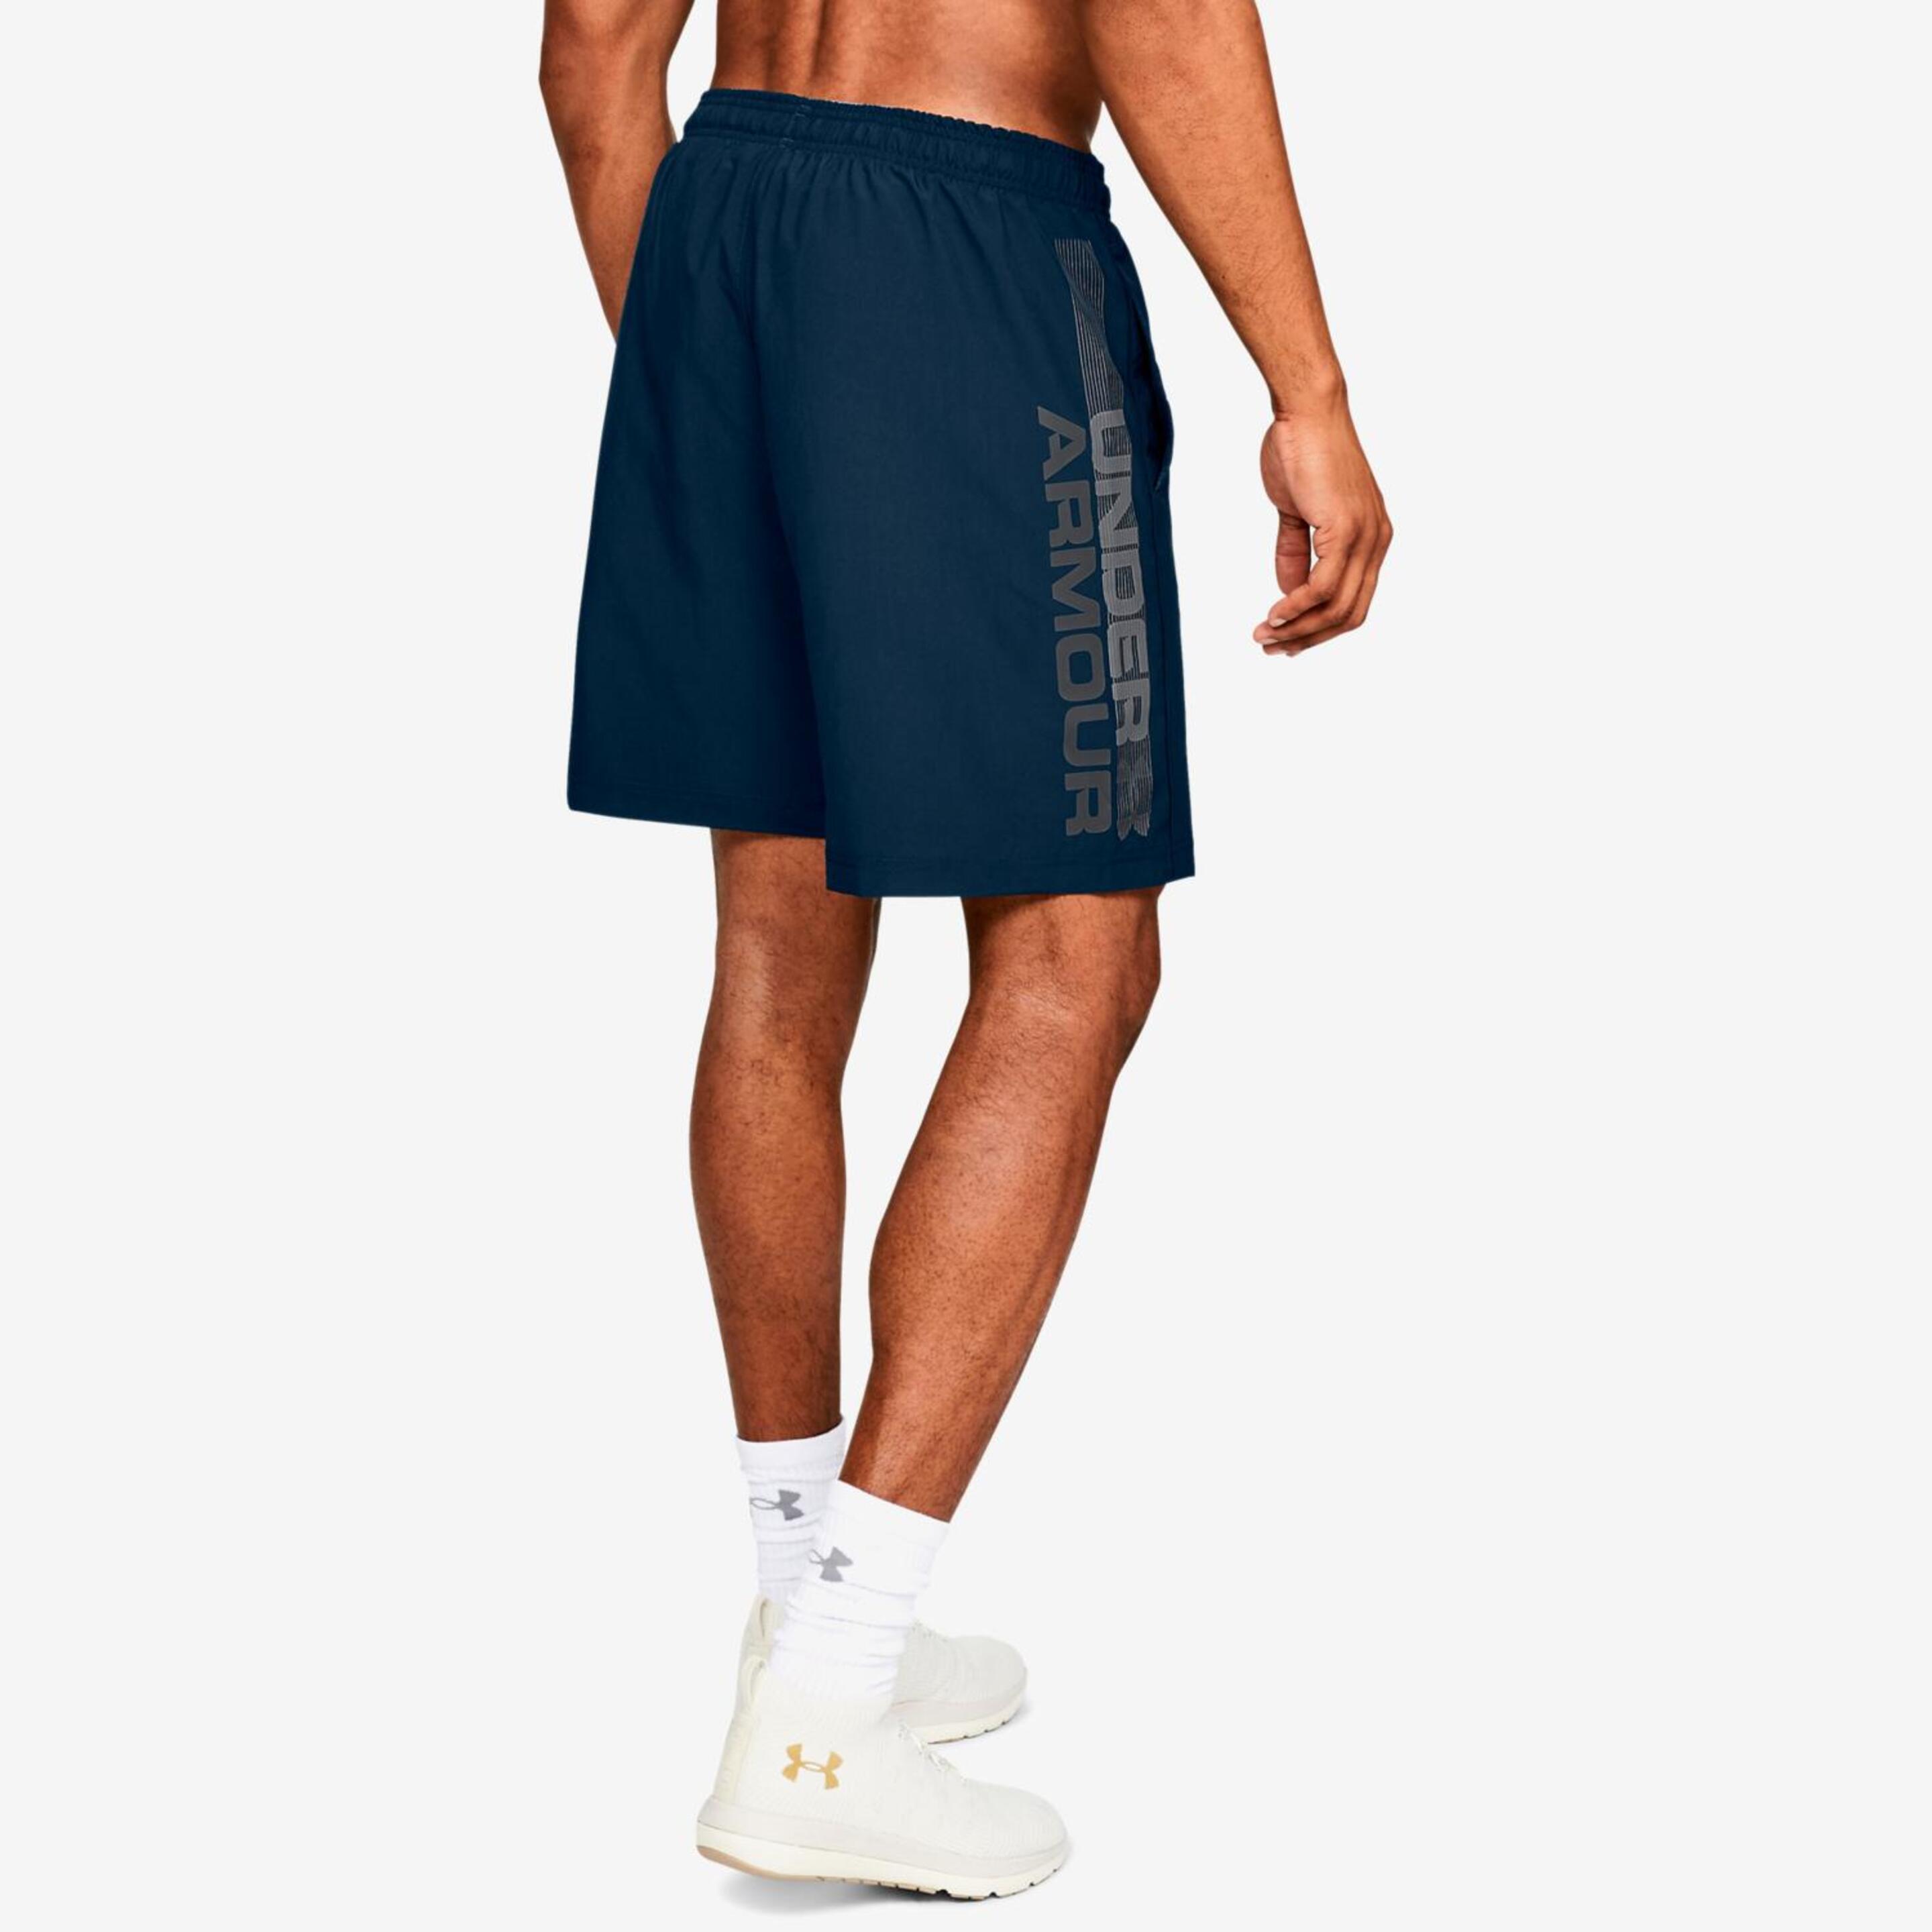 Under Armour Woven Graphic Wordmark Shorts 1320203-408